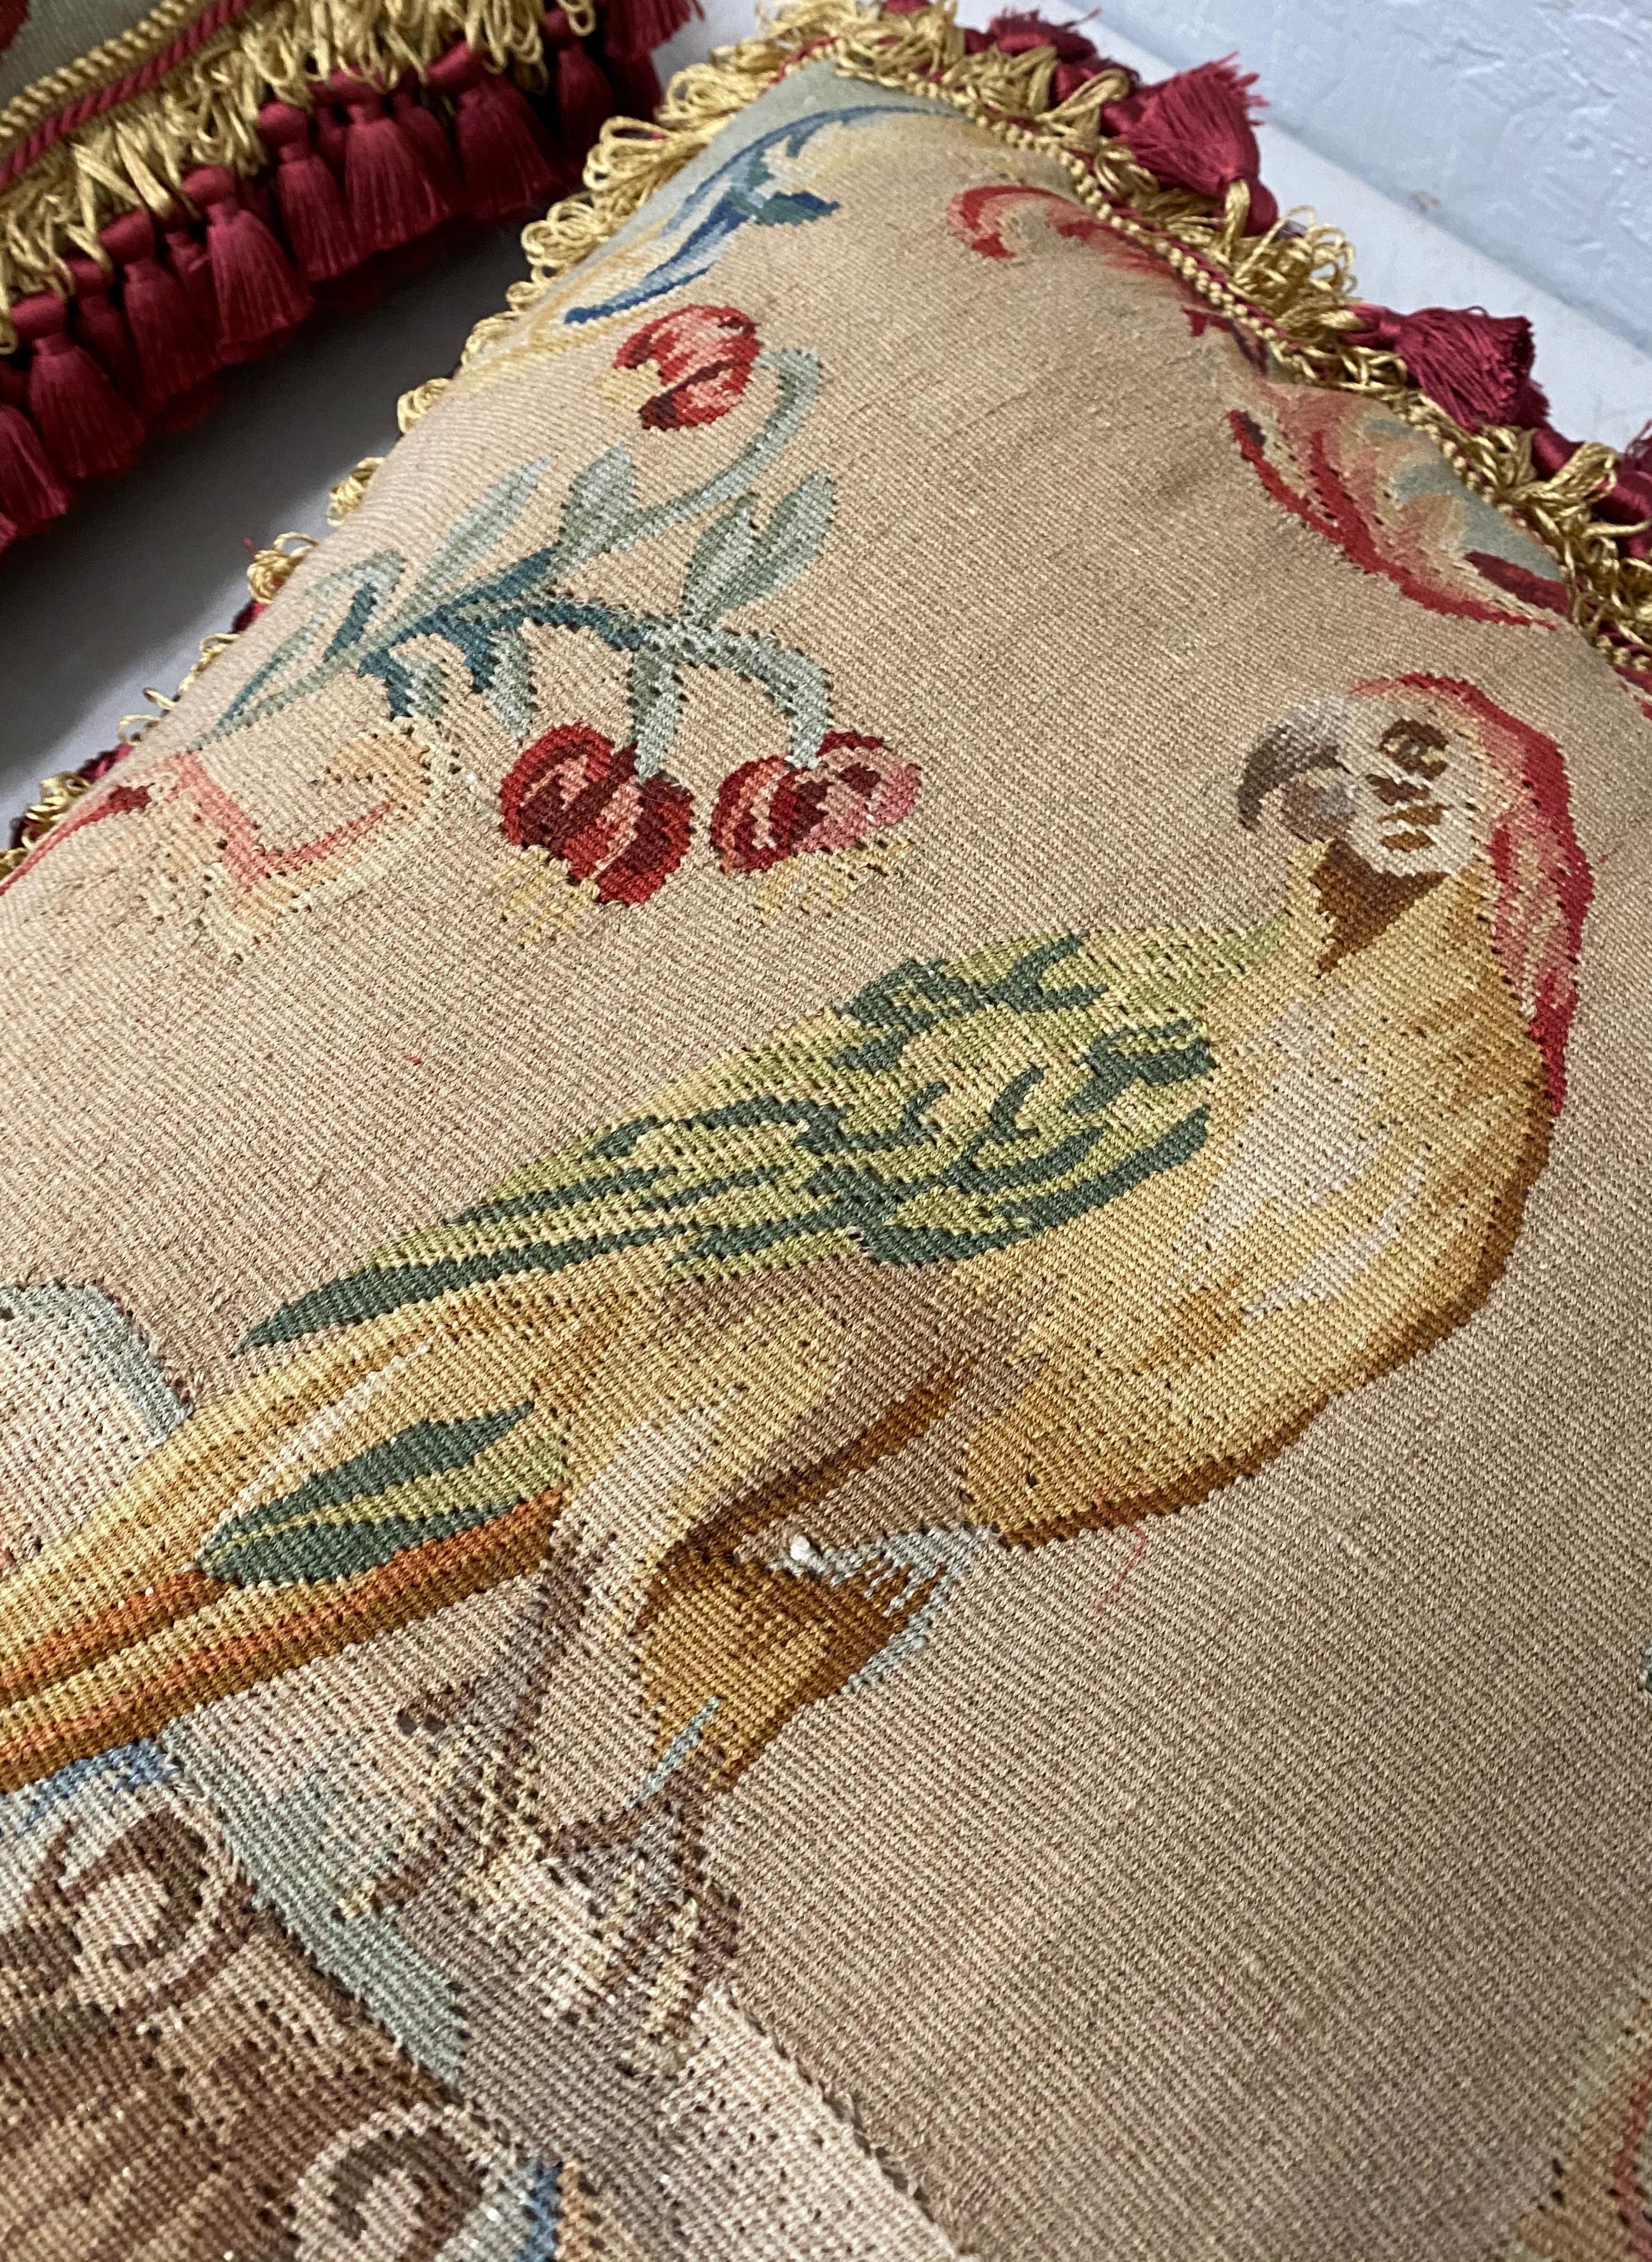 Textile Pair of 19th Century Petit Point Panels over Mid-20th Century Pillows